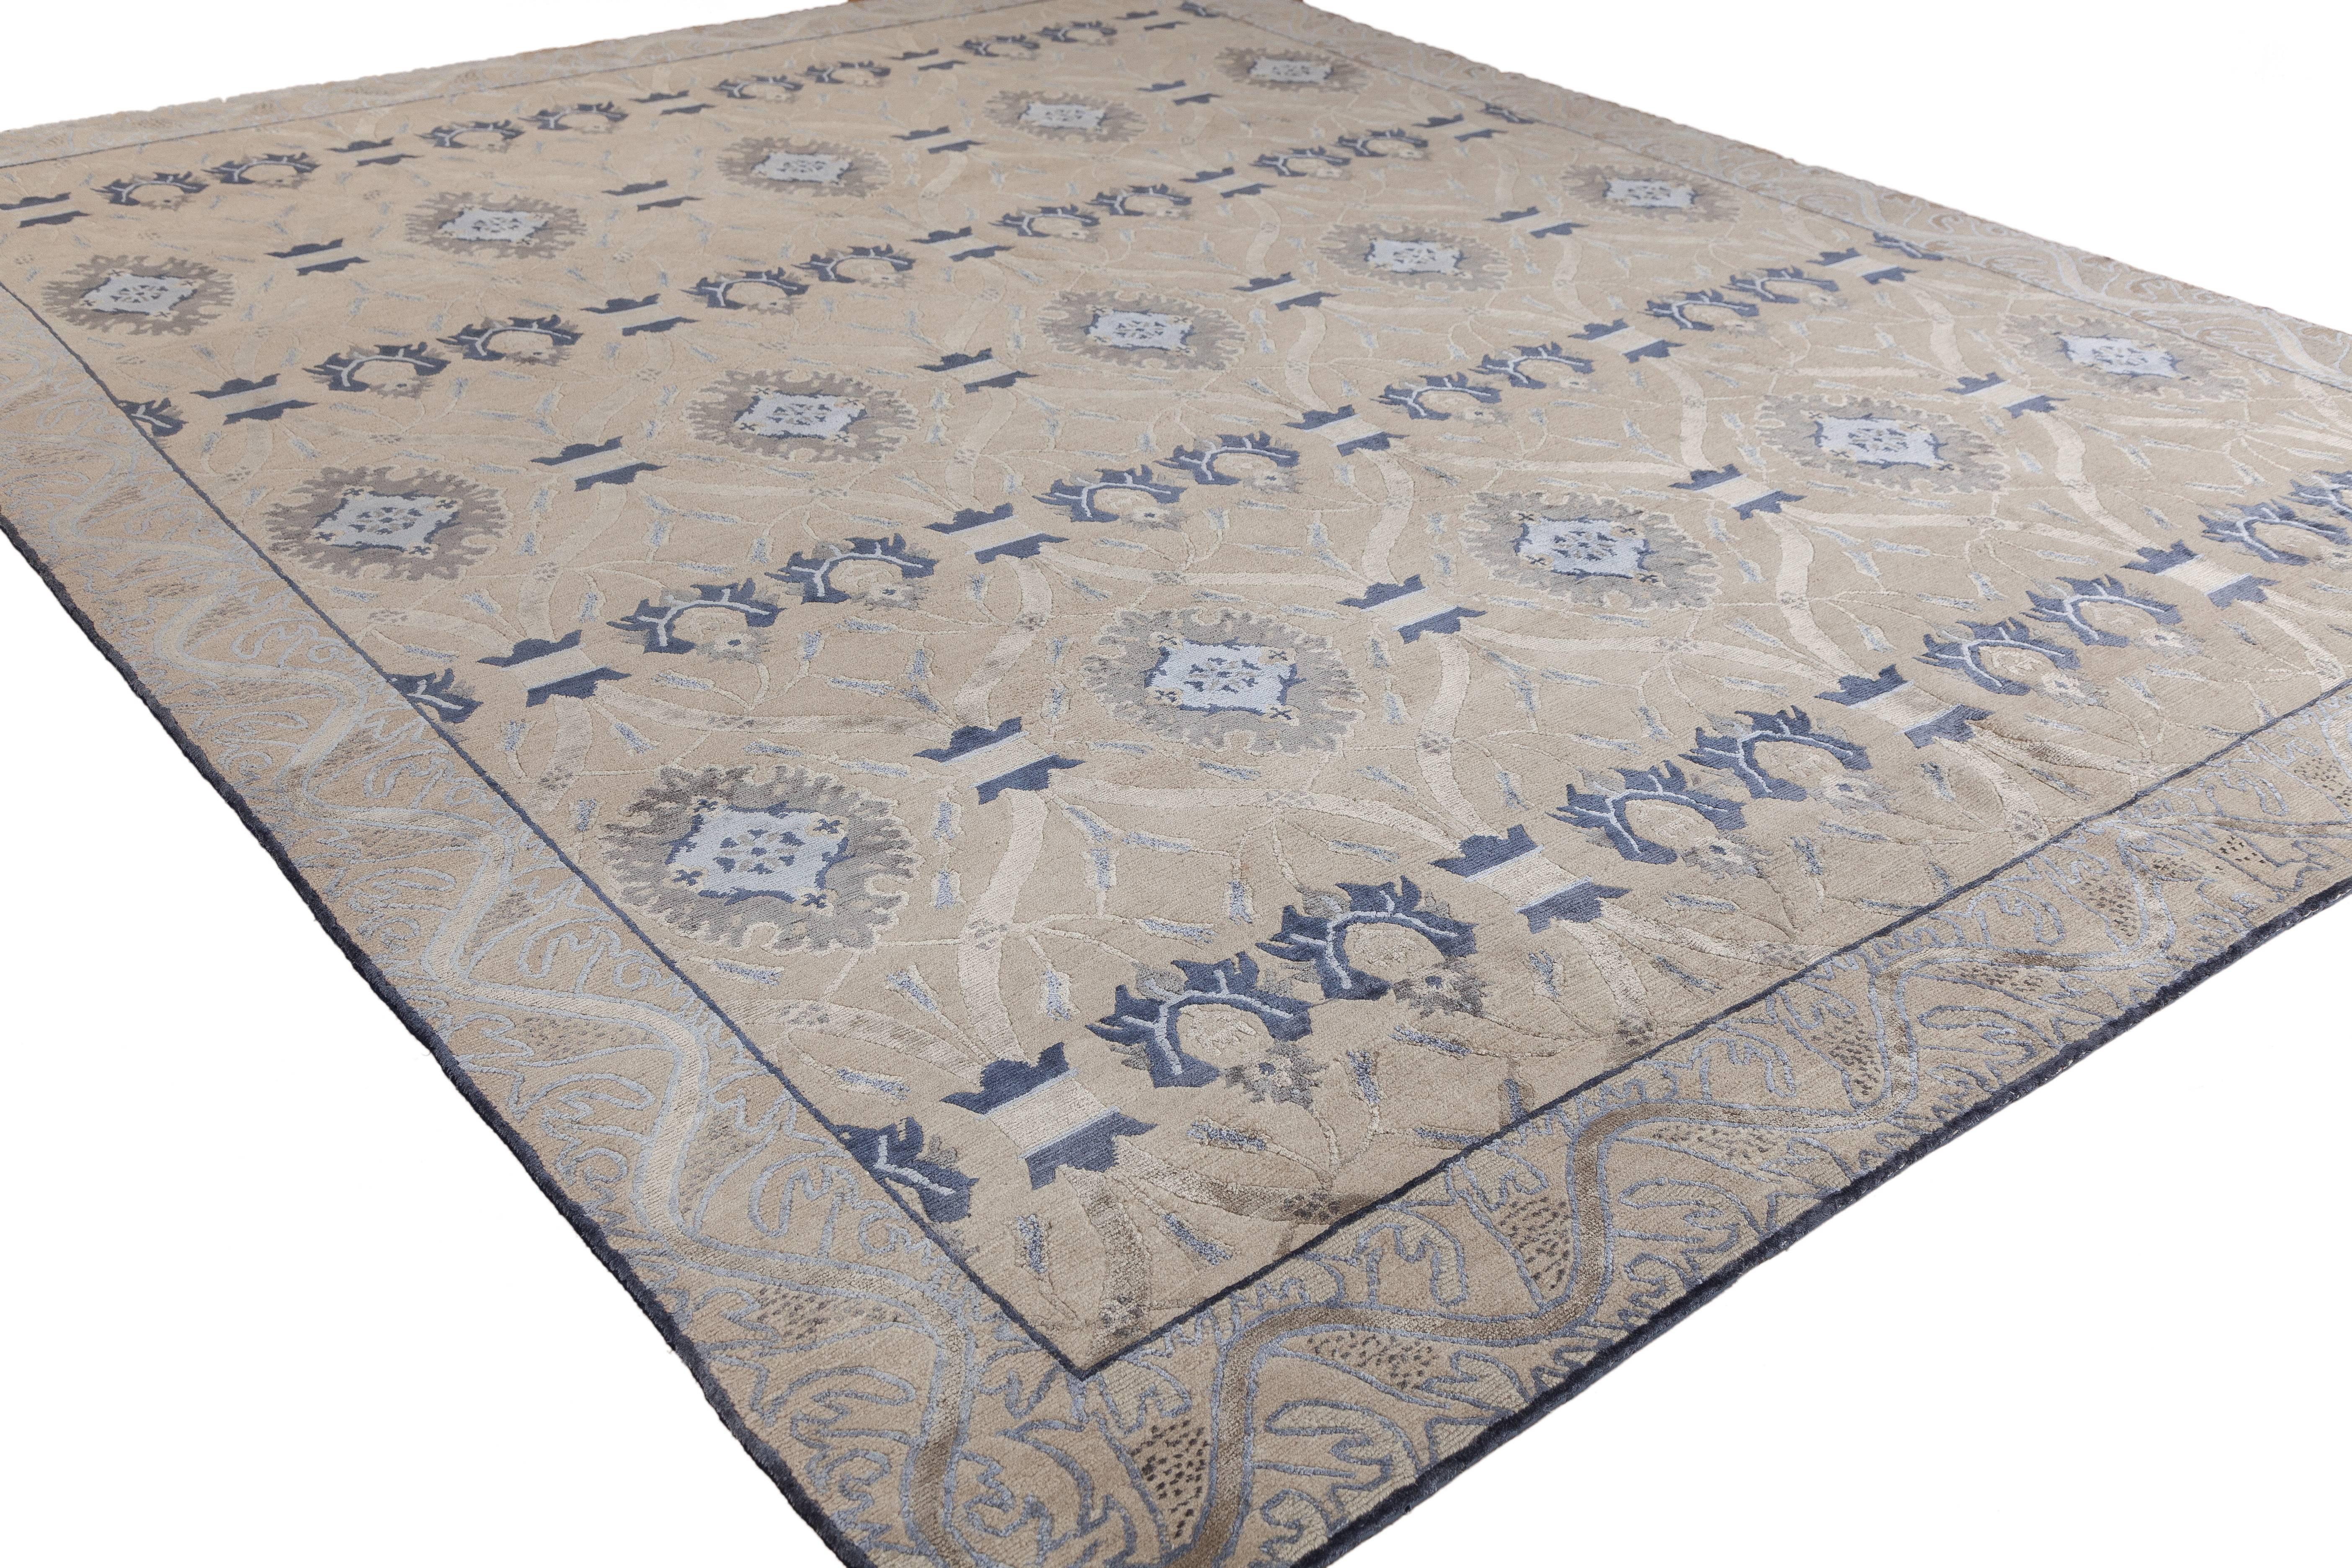 A perfect blend of Classic and modern sensibilities. A revitalization of a Classic brocaded pattern with an elegant vine border. This coloration features a shark-grey Tibetan wool background with design motifs in silver, periwinkle-blue, rich navy